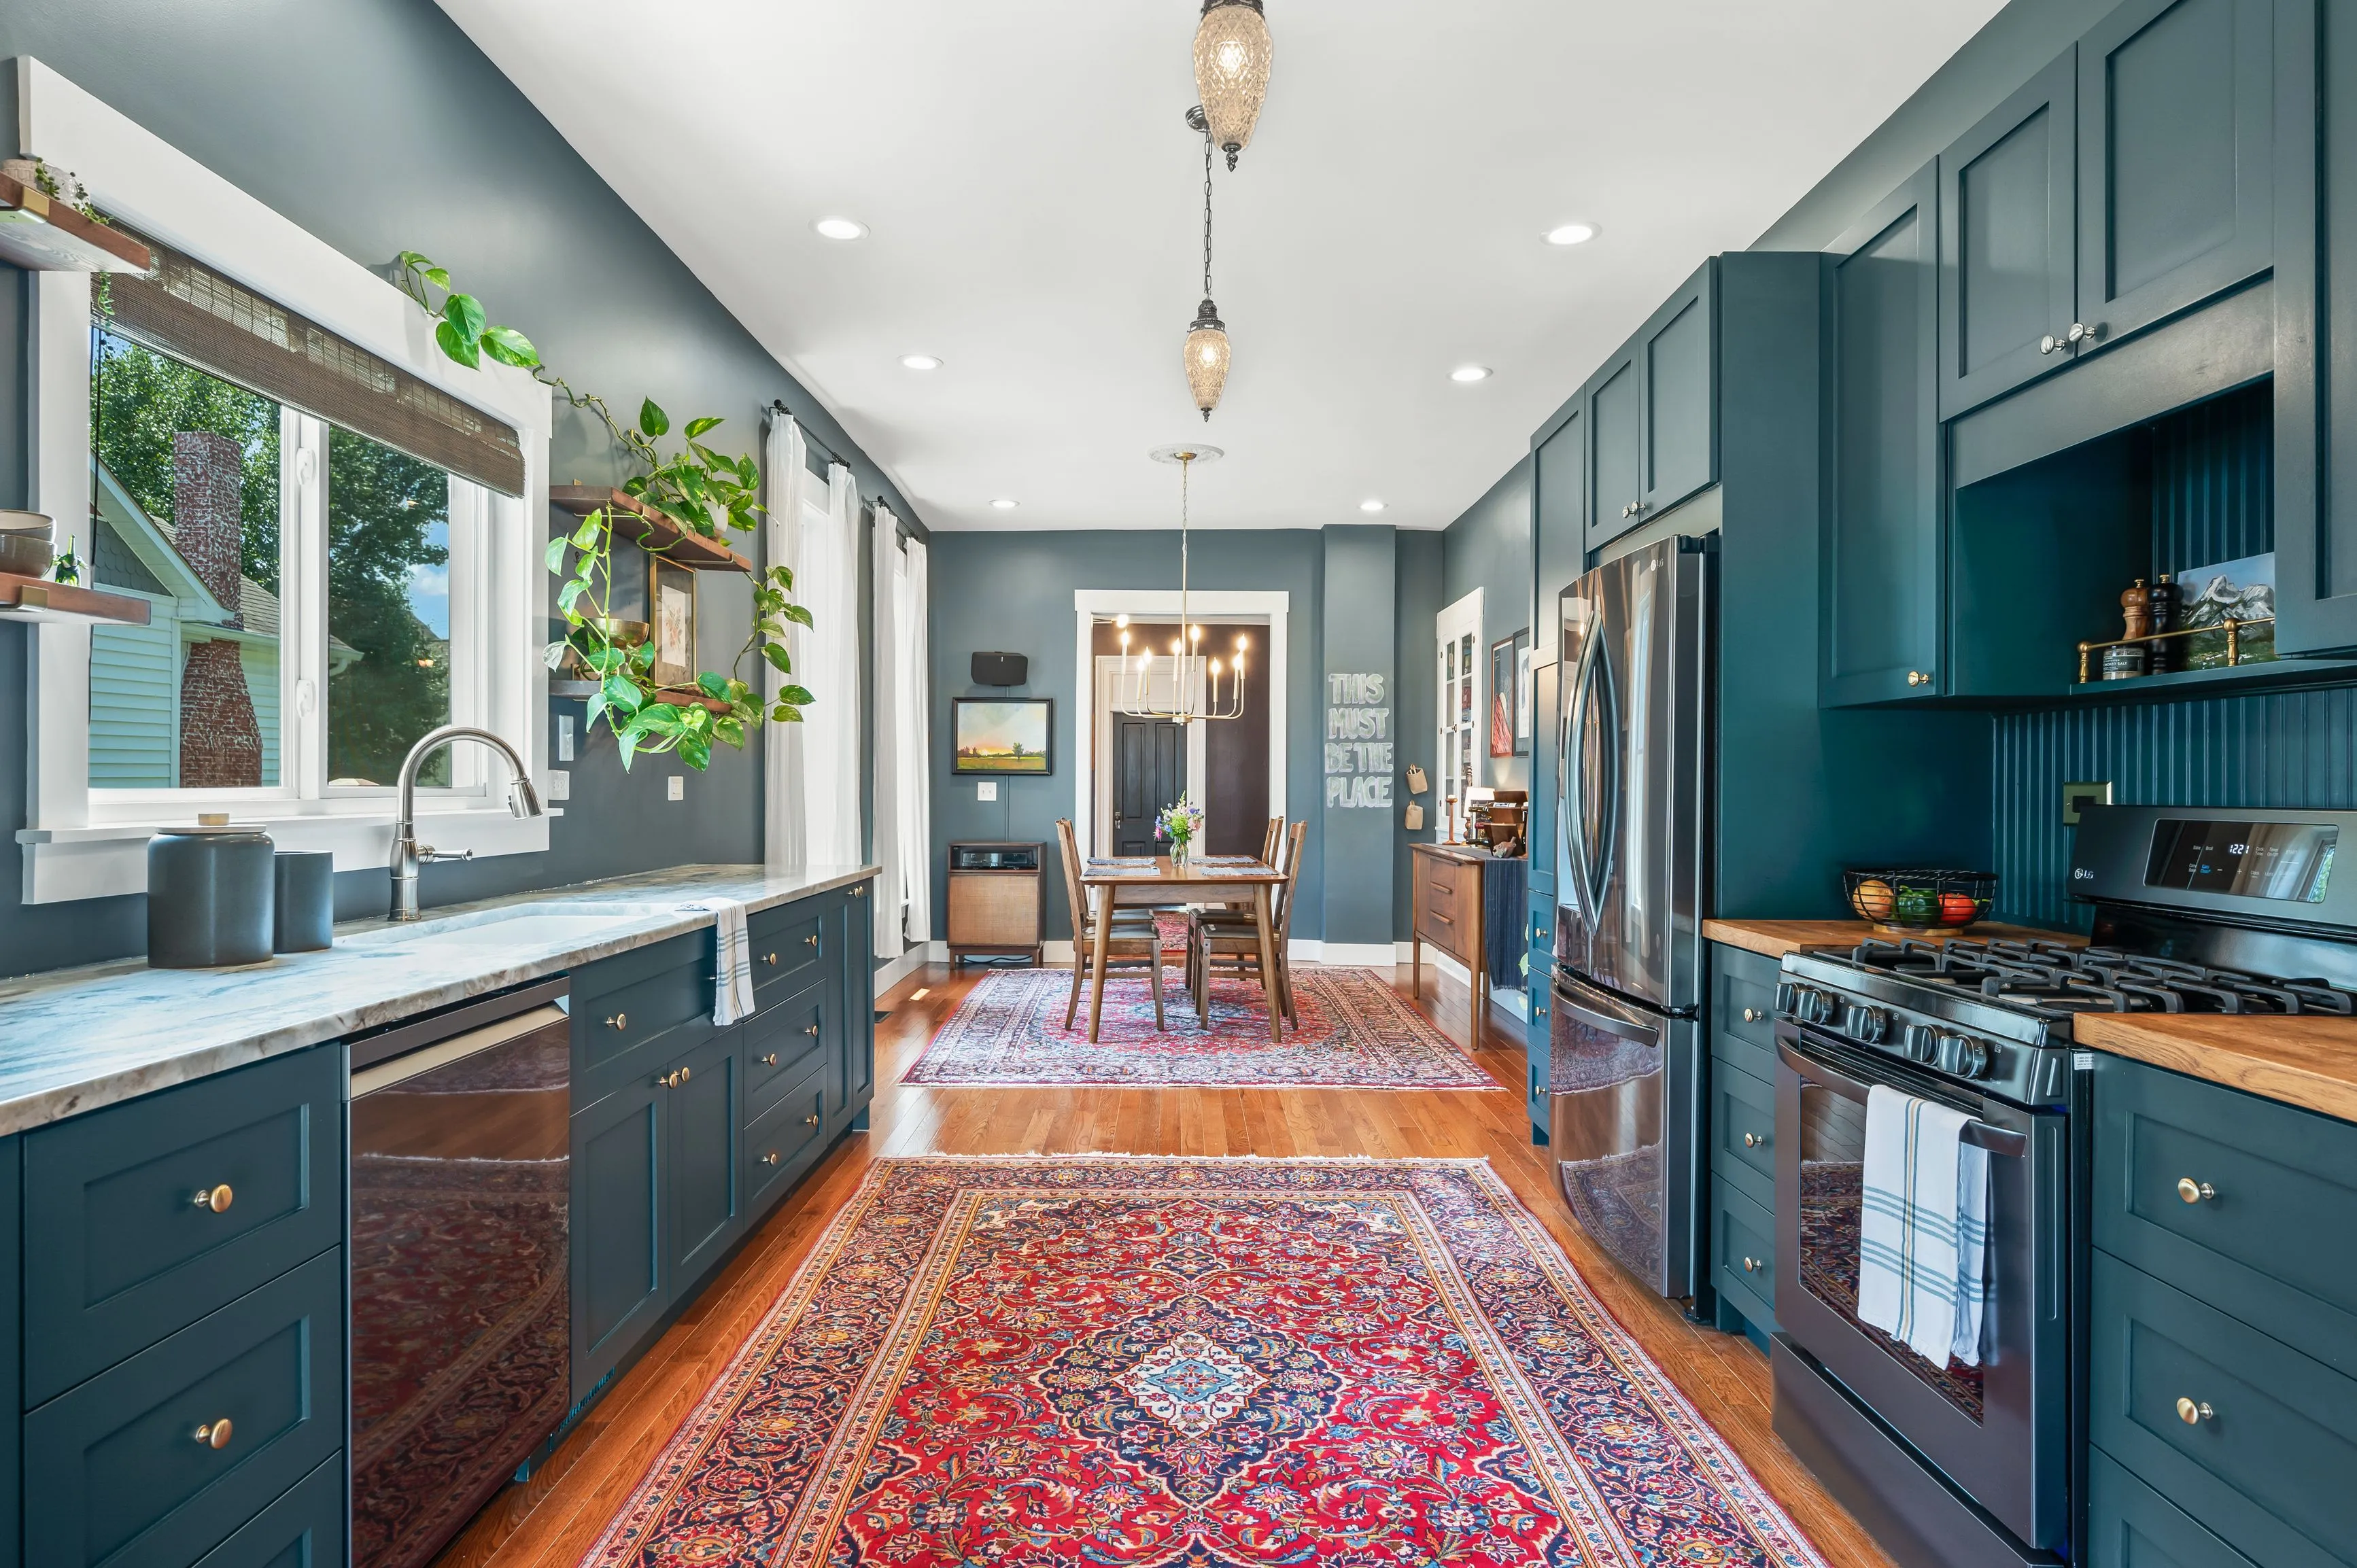 Elegant kitchen interior with dark blue cabinetry, stainless steel appliances, a colorful rug on hardwood floor, and pendant lighting, leading to a dining area.